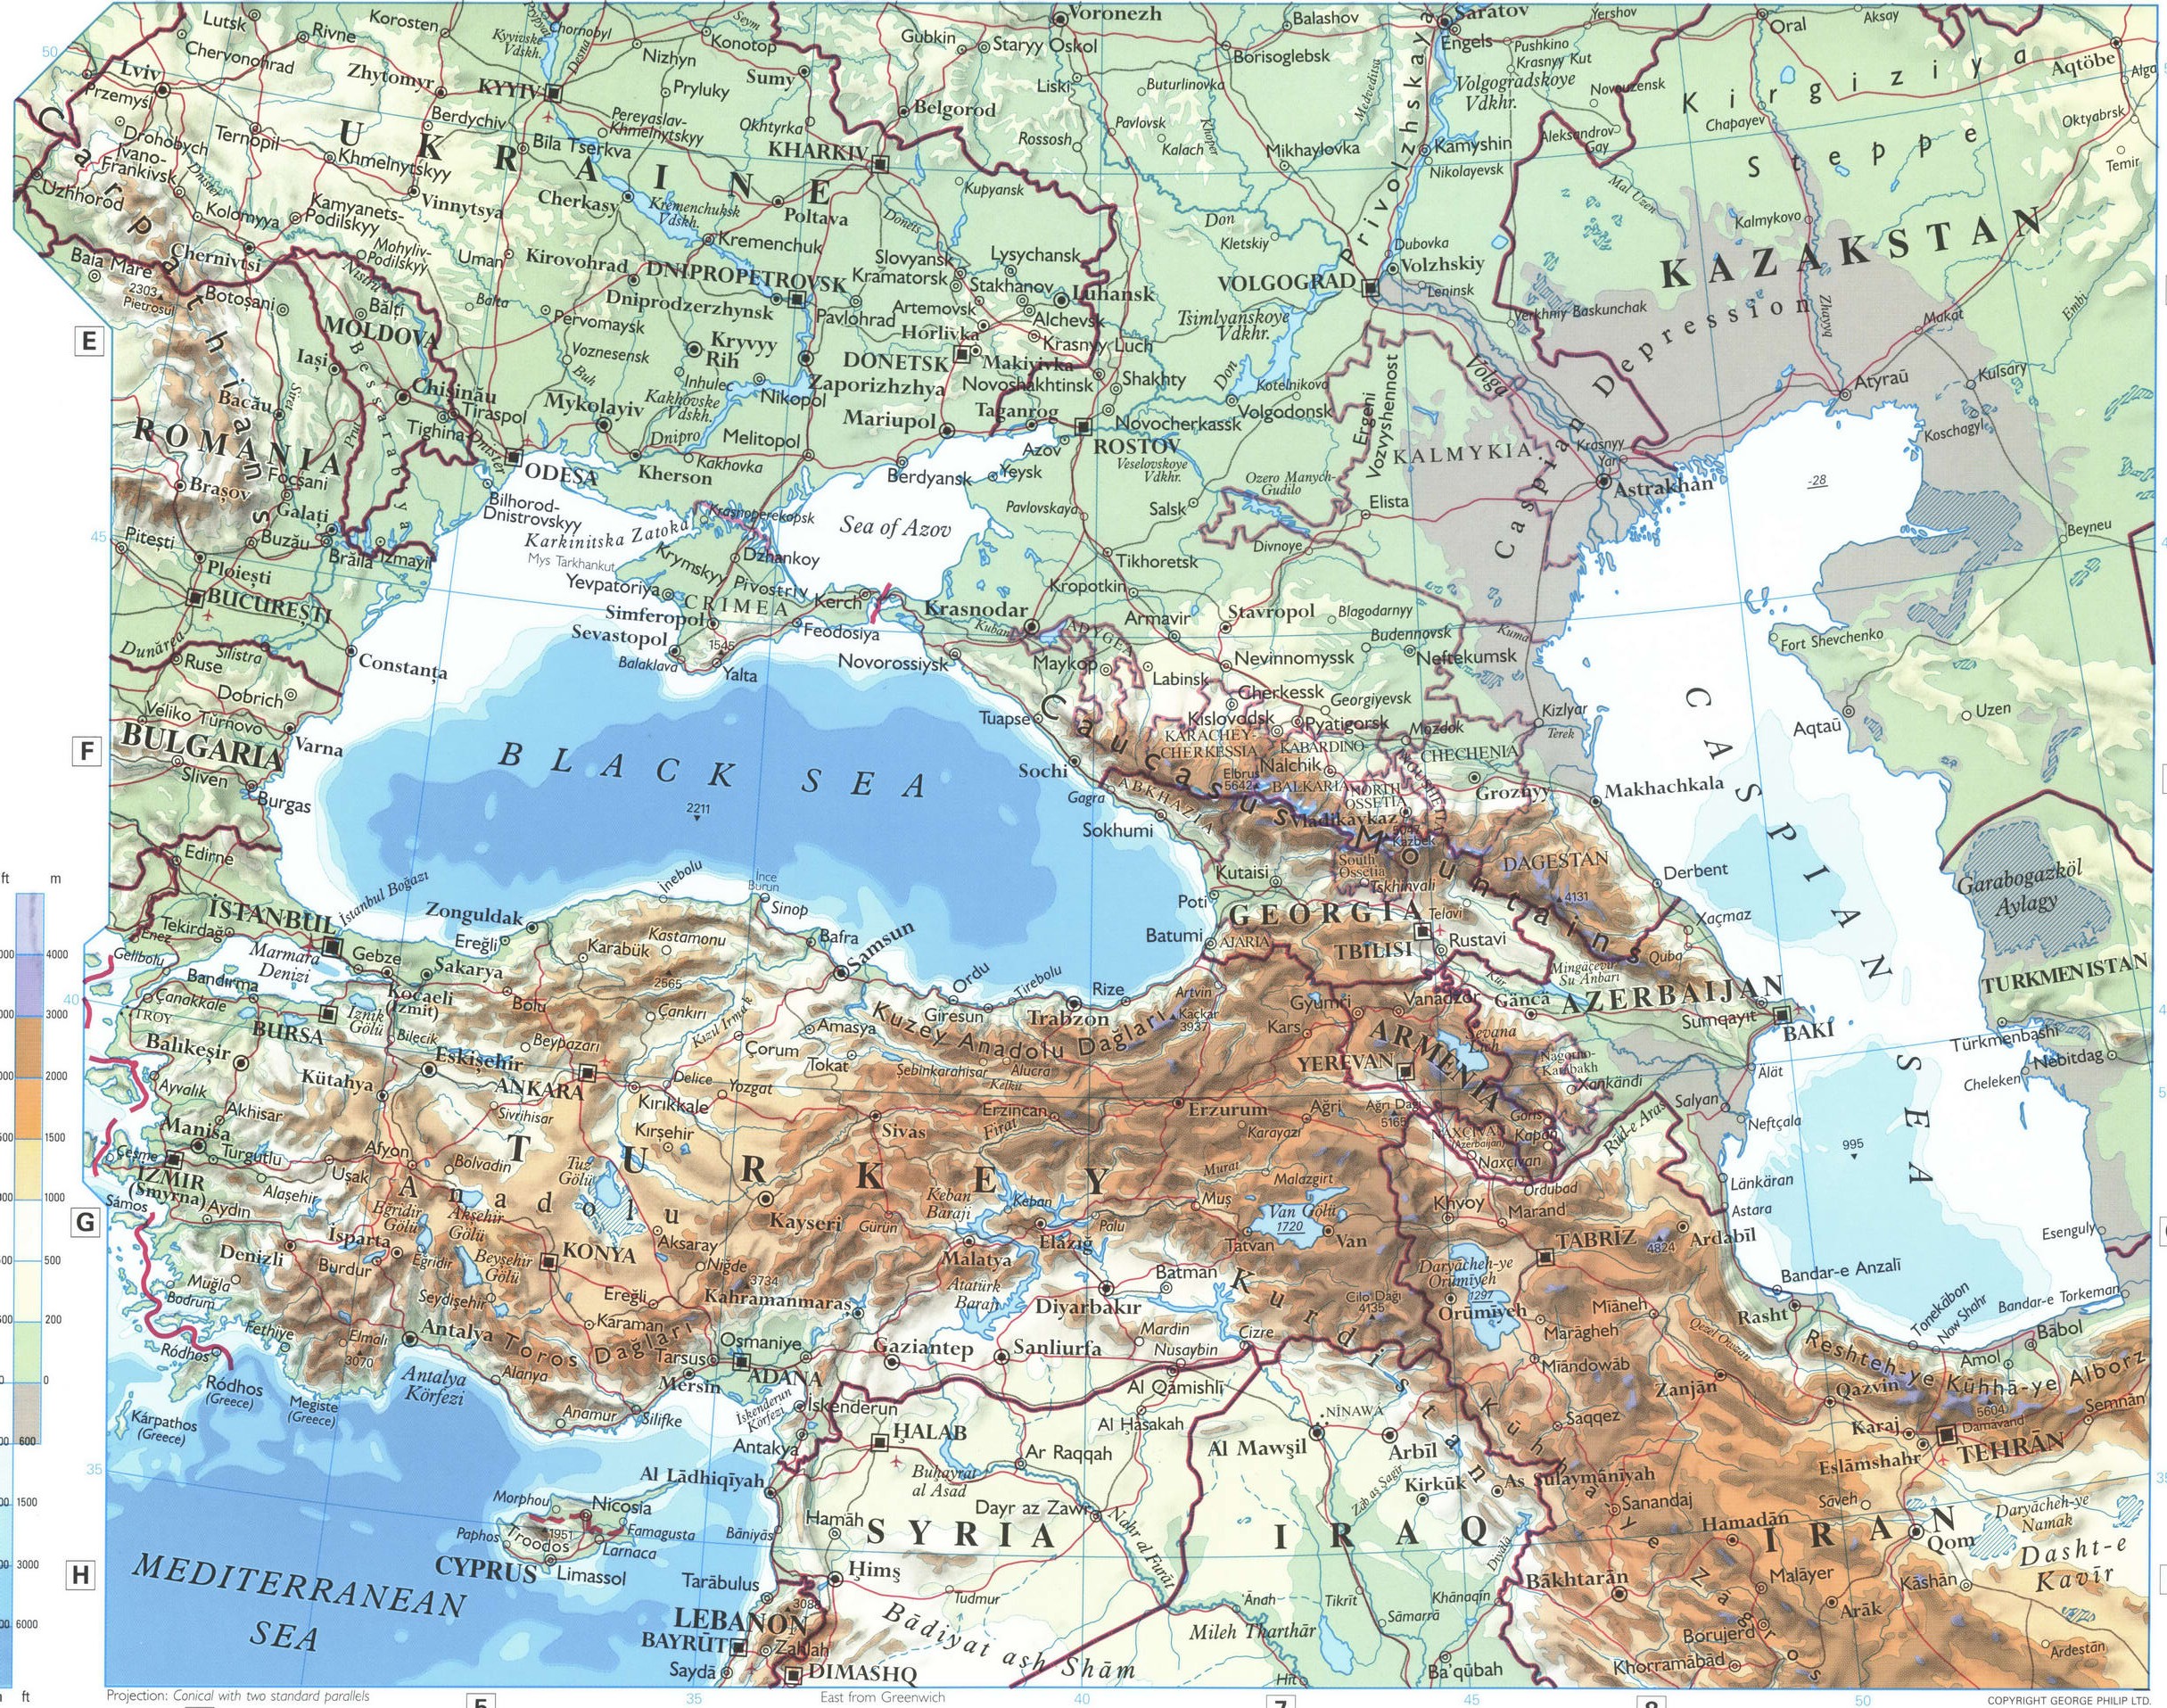 European Russia and Turkey map